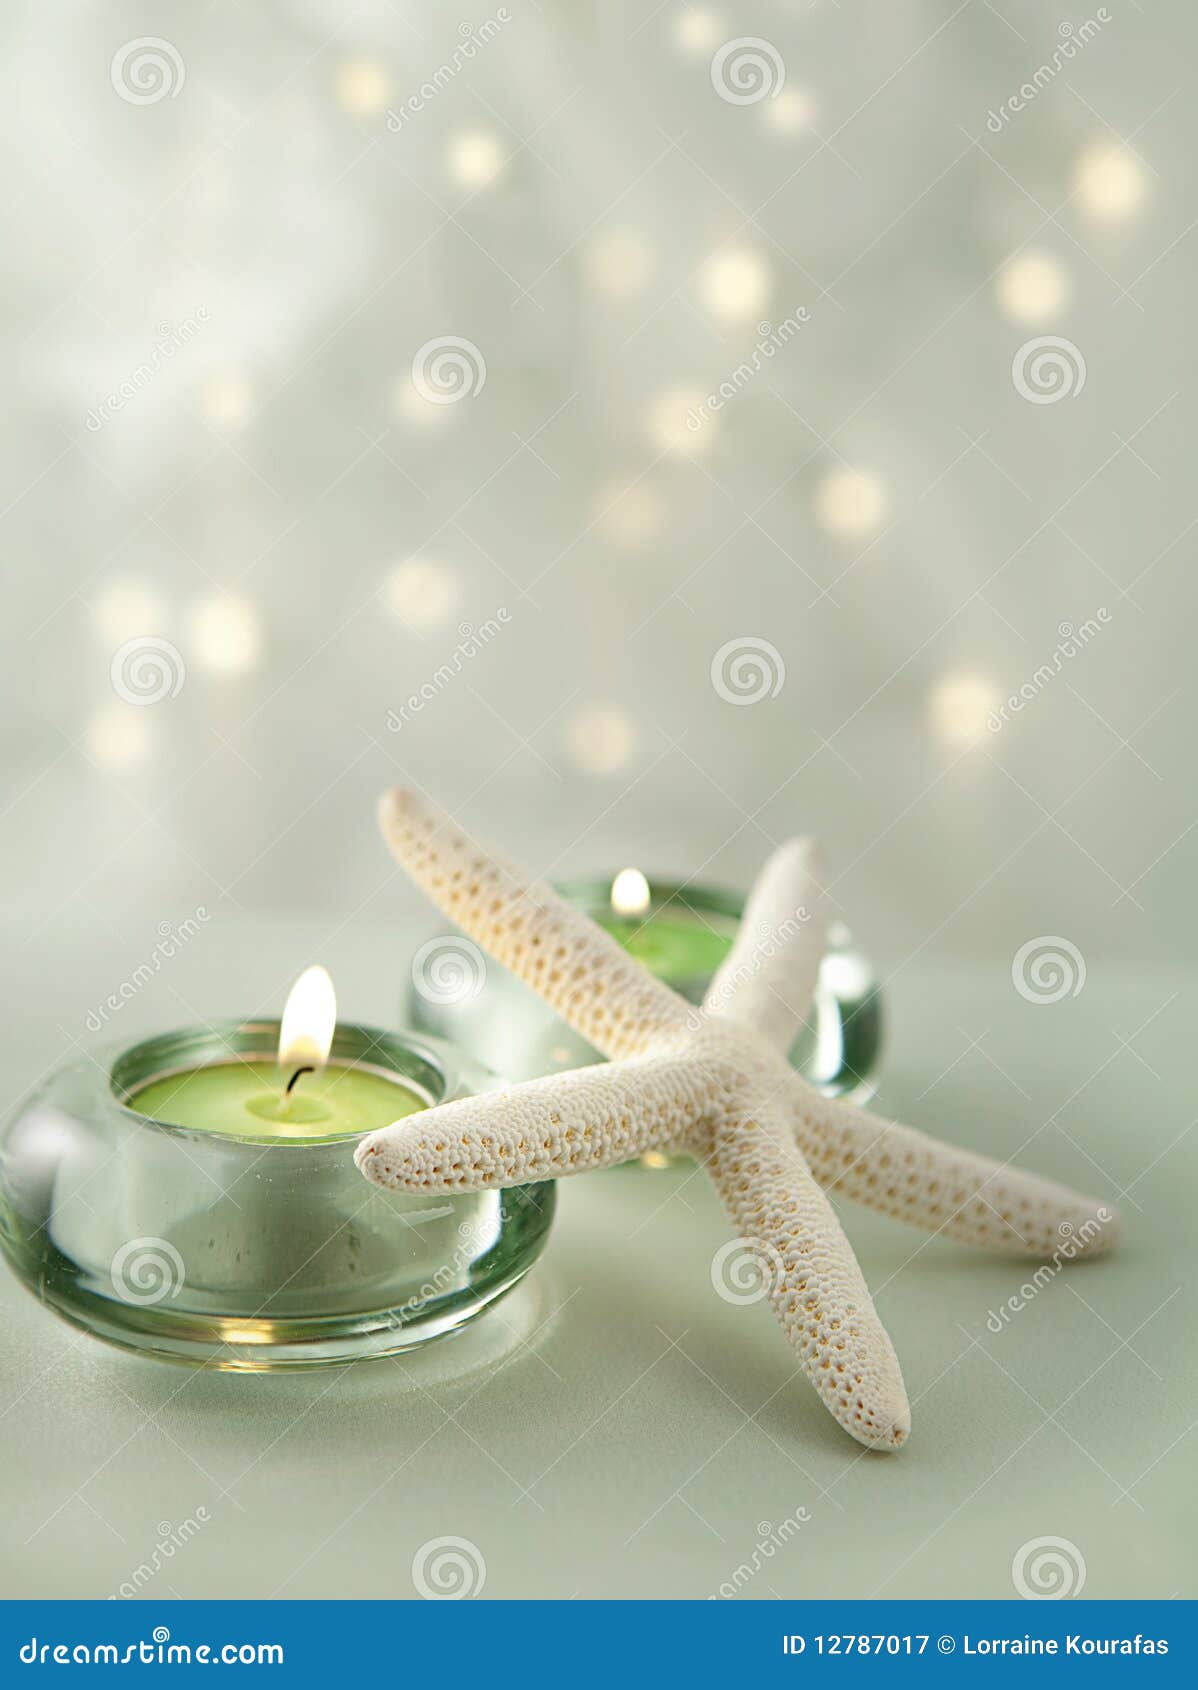 soft spa scene with gentle lights